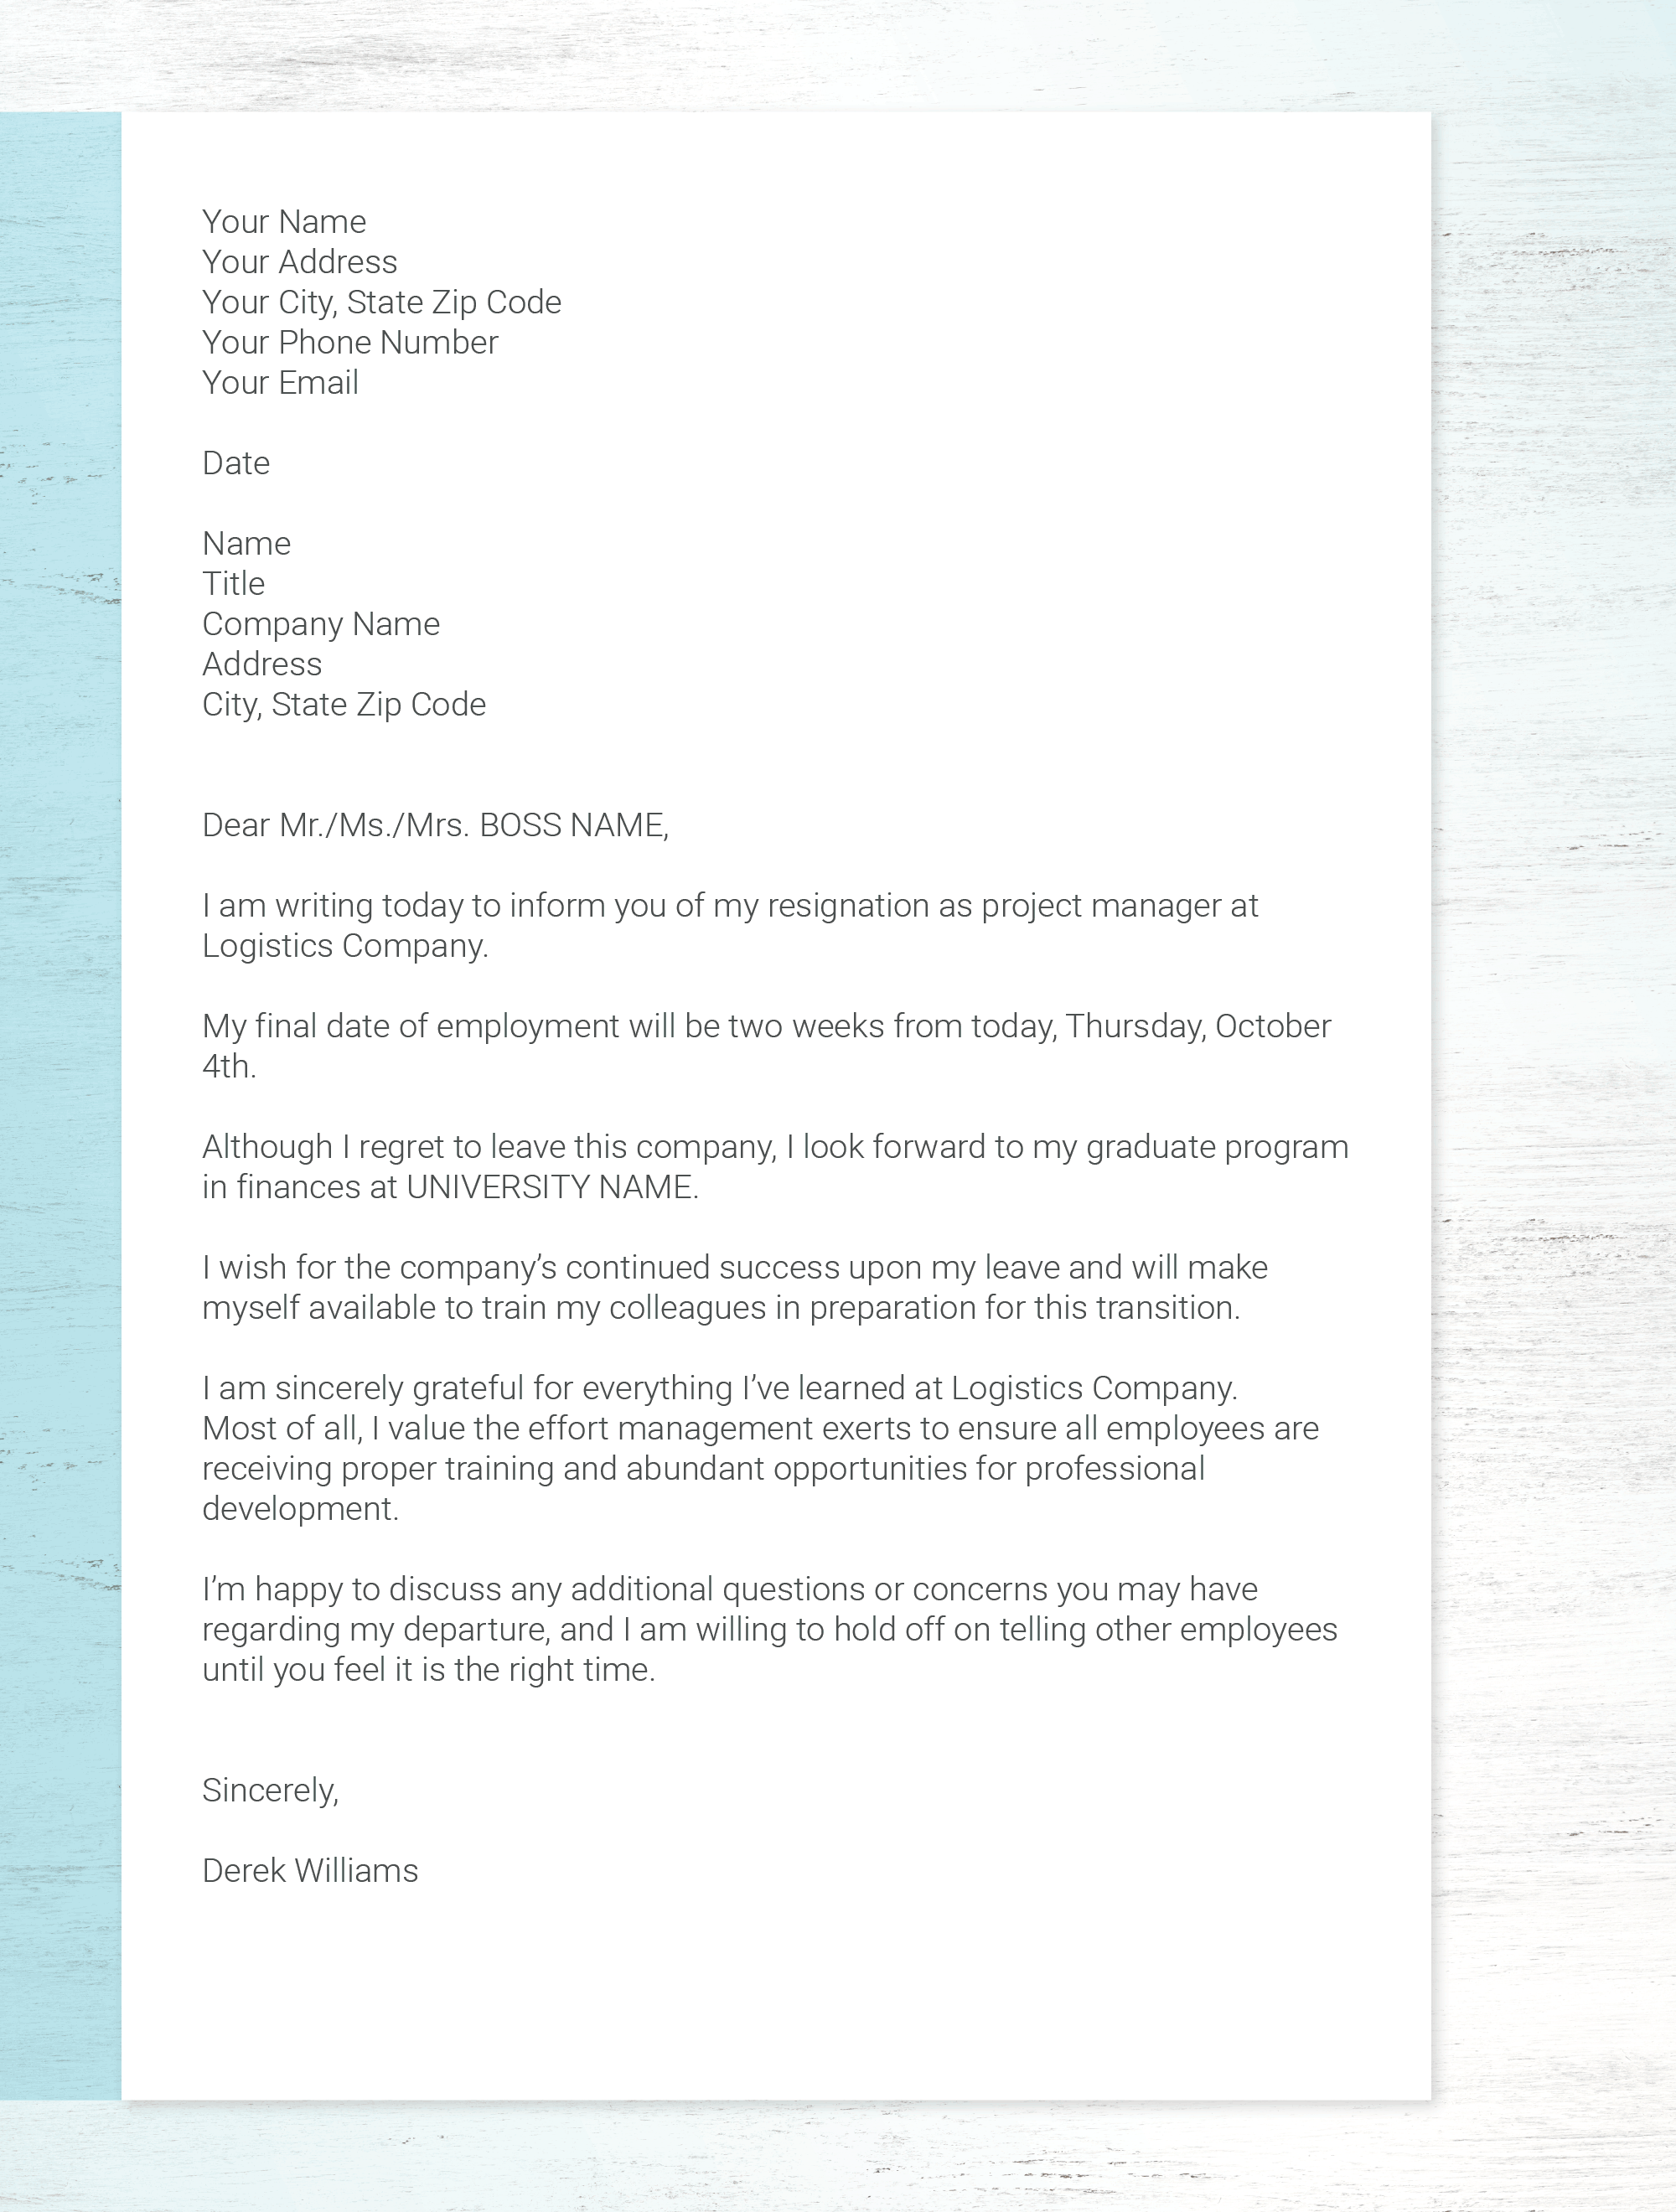 Sample Letter To Clients About Employee Leaving from learn.g2.com